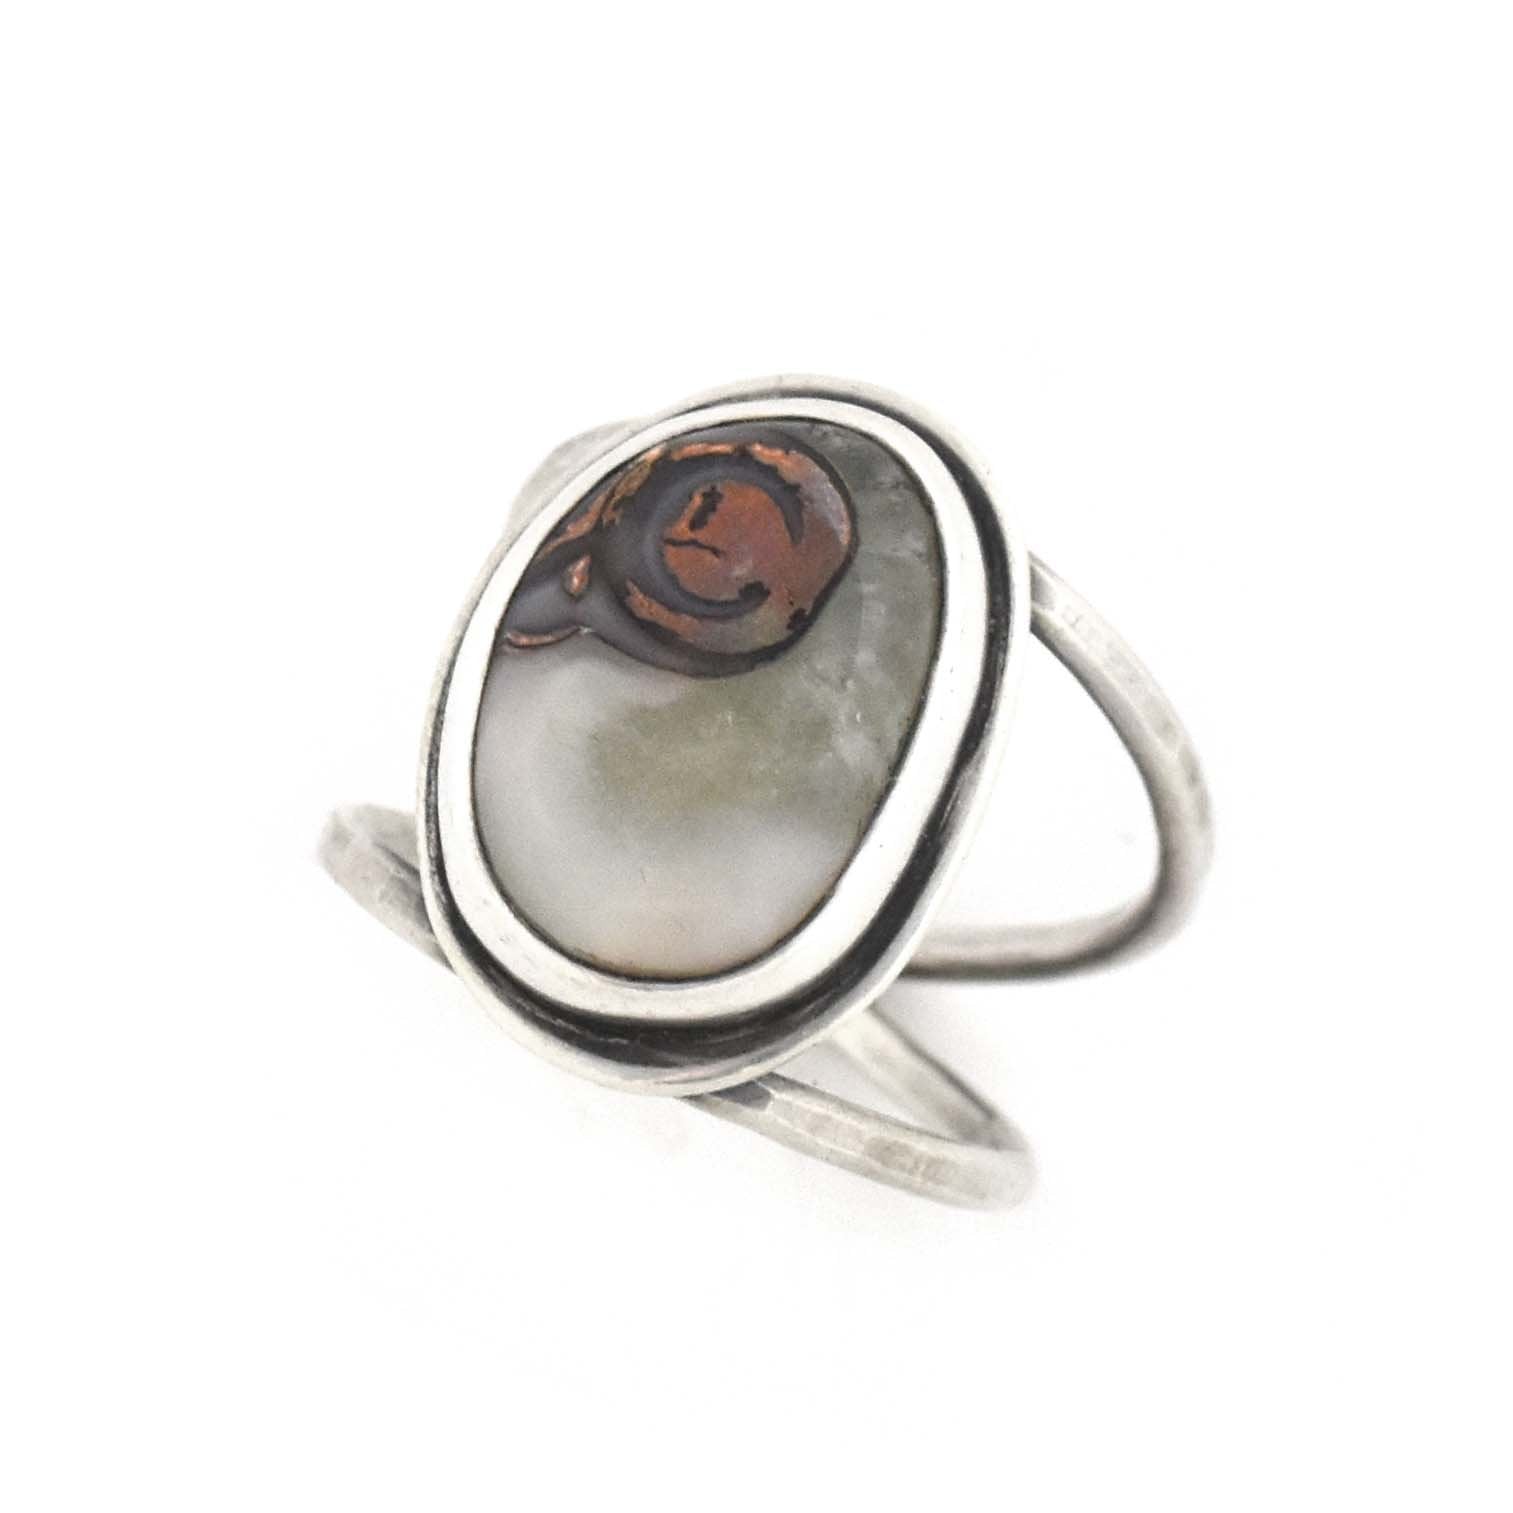 Copper Lake Superior Agate Ring - Size 8.75 - Ring   5680 - handmade by Beth Millner Jewelry